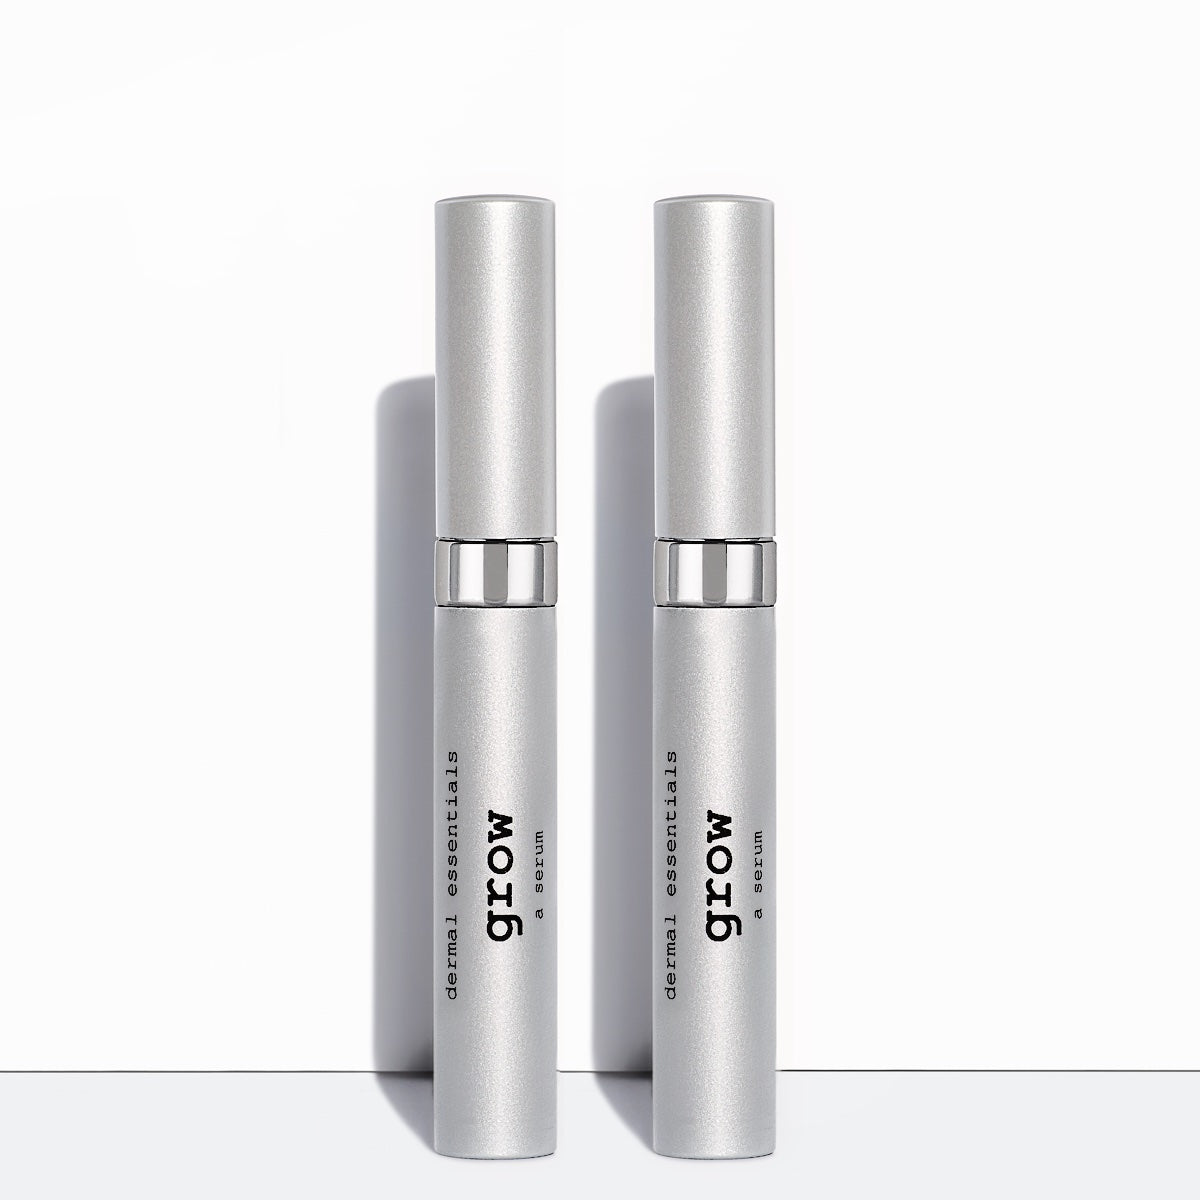  Two Silver cylinder tubes black letters white wand applicator 0.17 oz. Peptide Lash and Peptide Brow serum. Grow longer lashes and fuller brows Dermal Essentials Medical Grade Skincare  